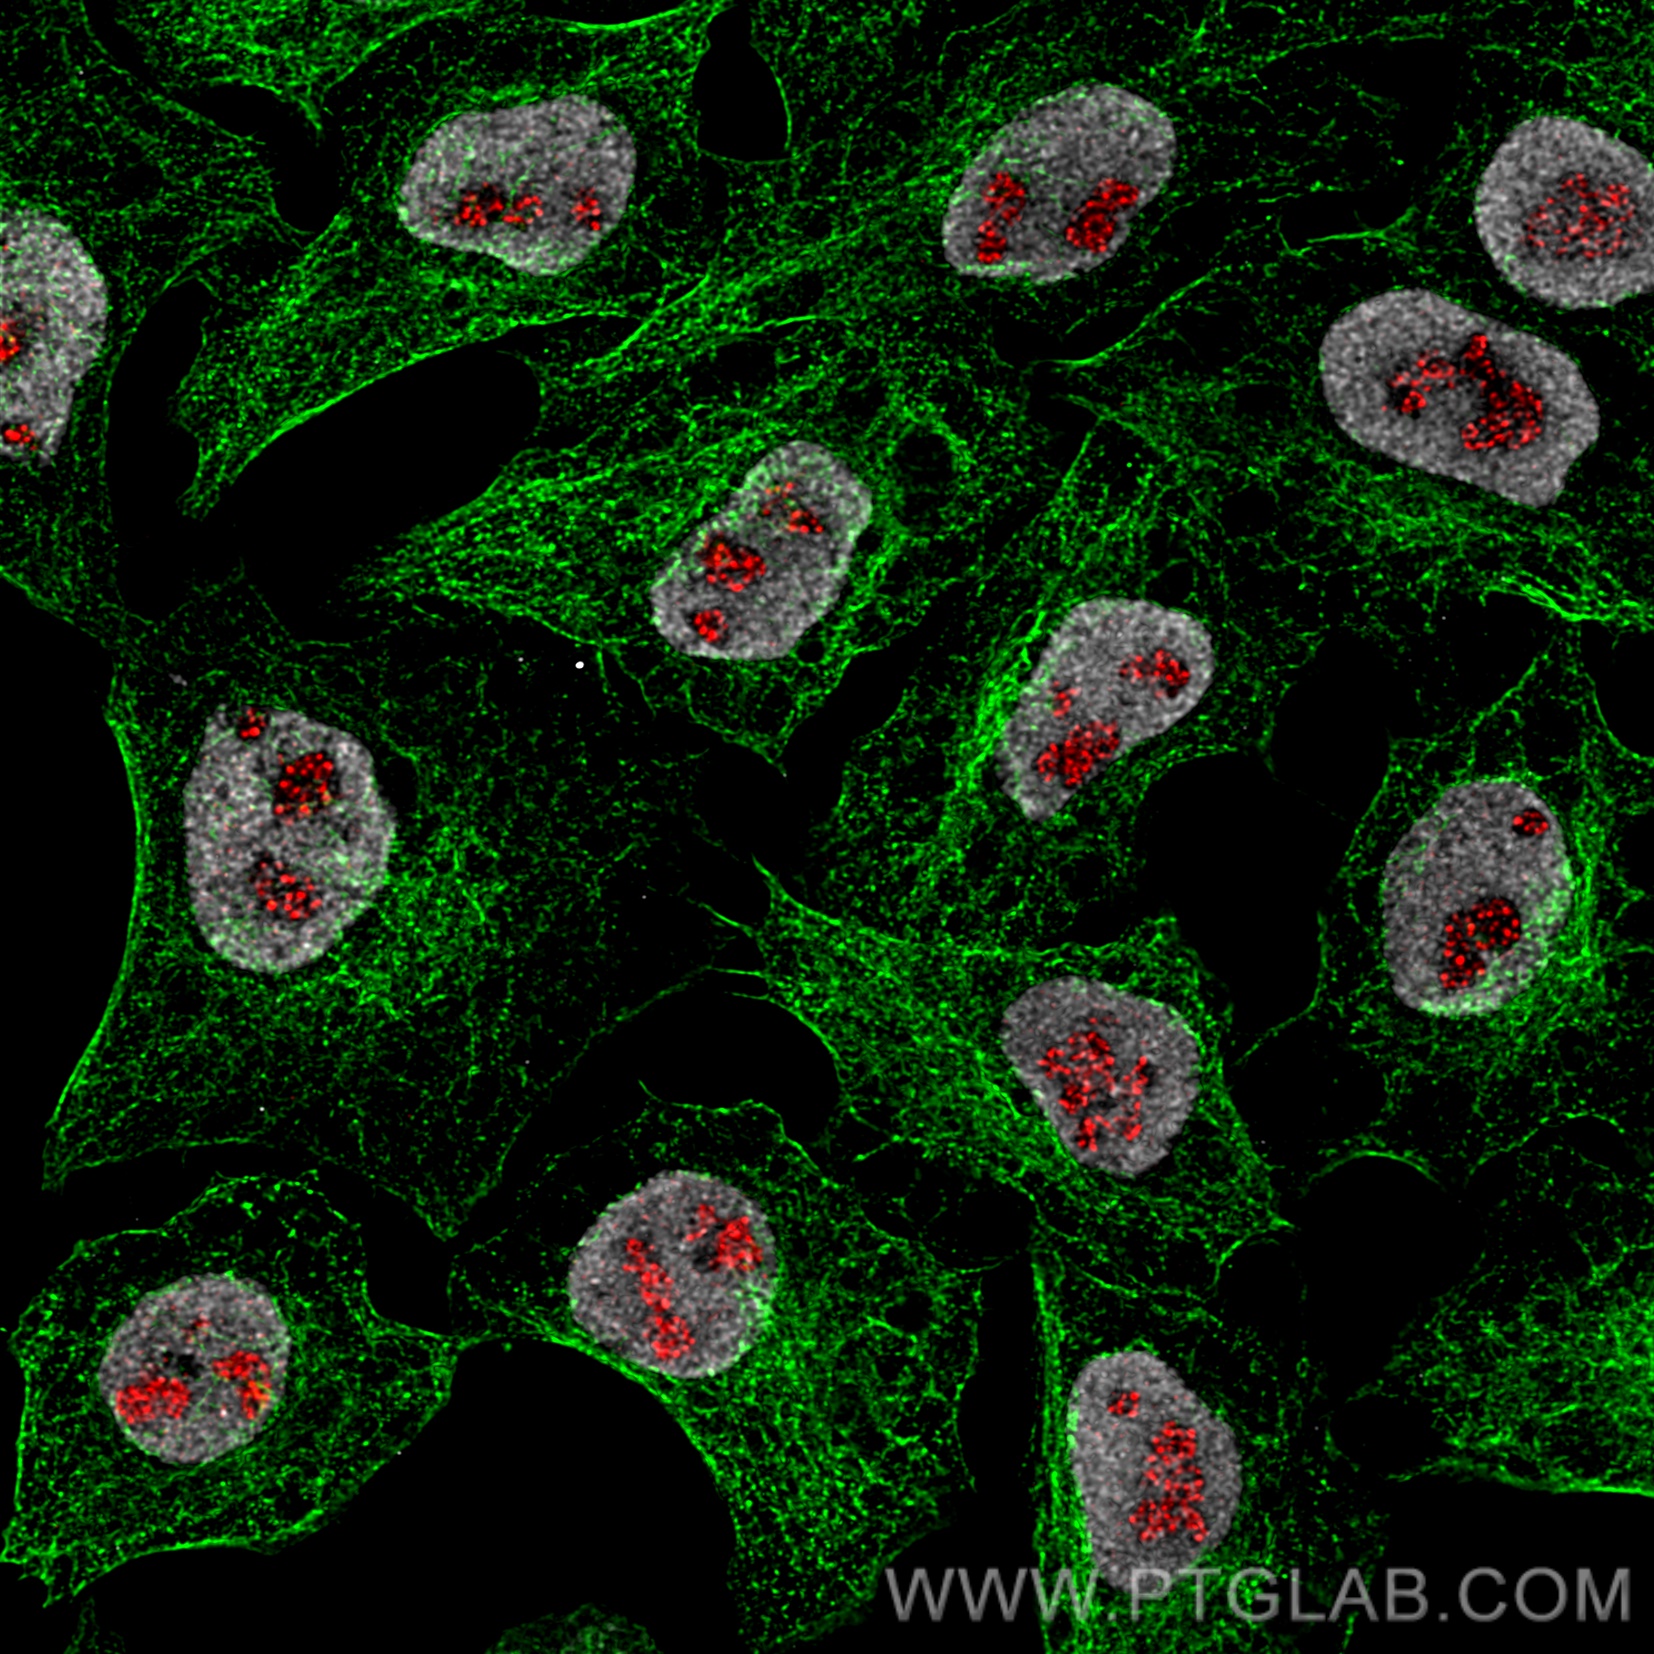 Immunofluorescence of HeLa: PFA-fixed HeLa cells were stained with anti-Tubulin antibody labeled with FlexAble CoraLite® Plus 488 Kit (KFA061, green), mouse IgG2b anti-PAF49 primary and anti-mouse IgG secondary antibody Alexa Fluor® 568 (red) and CoraLite® 647-conjugated HDAC2 antibody (CL647-67615, grey). Confocal images were acquired with a 100x oil objective and post-processed. Images were recorded at the Core Facility Bioimaging at the Biomedical Center, LMU Munich.